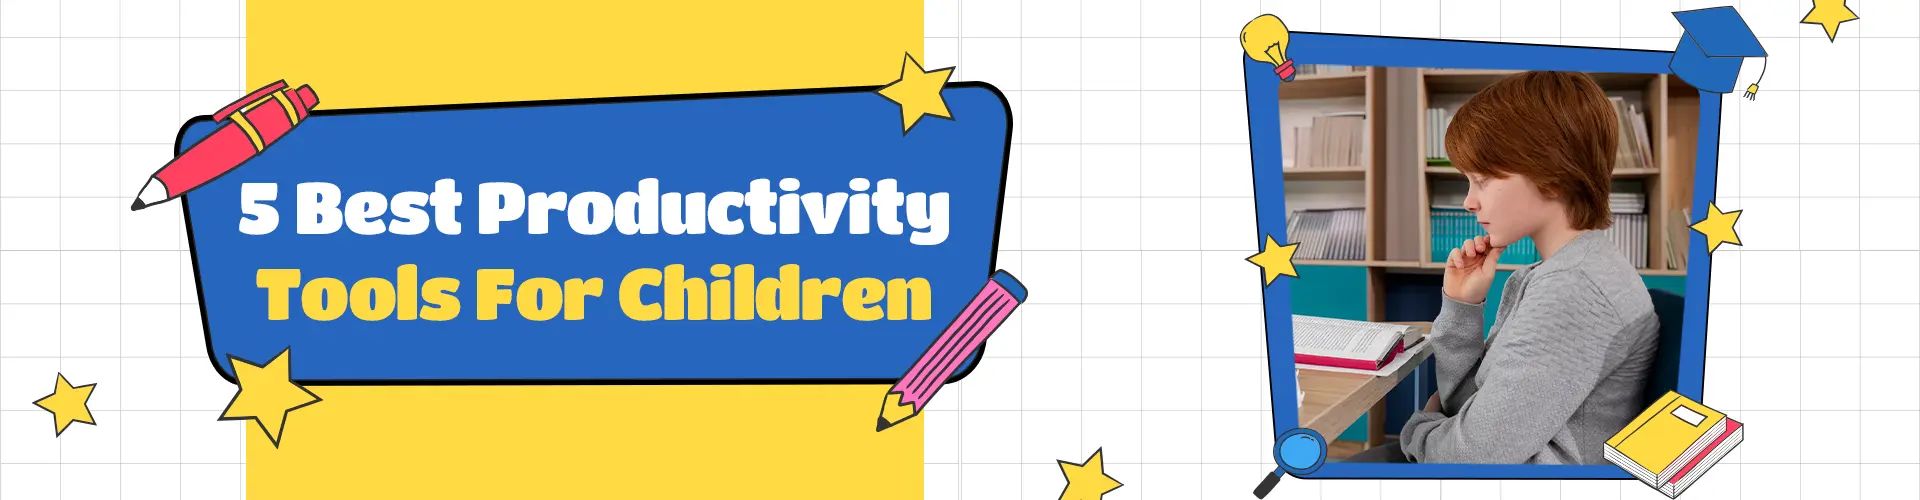 productivity tools for children